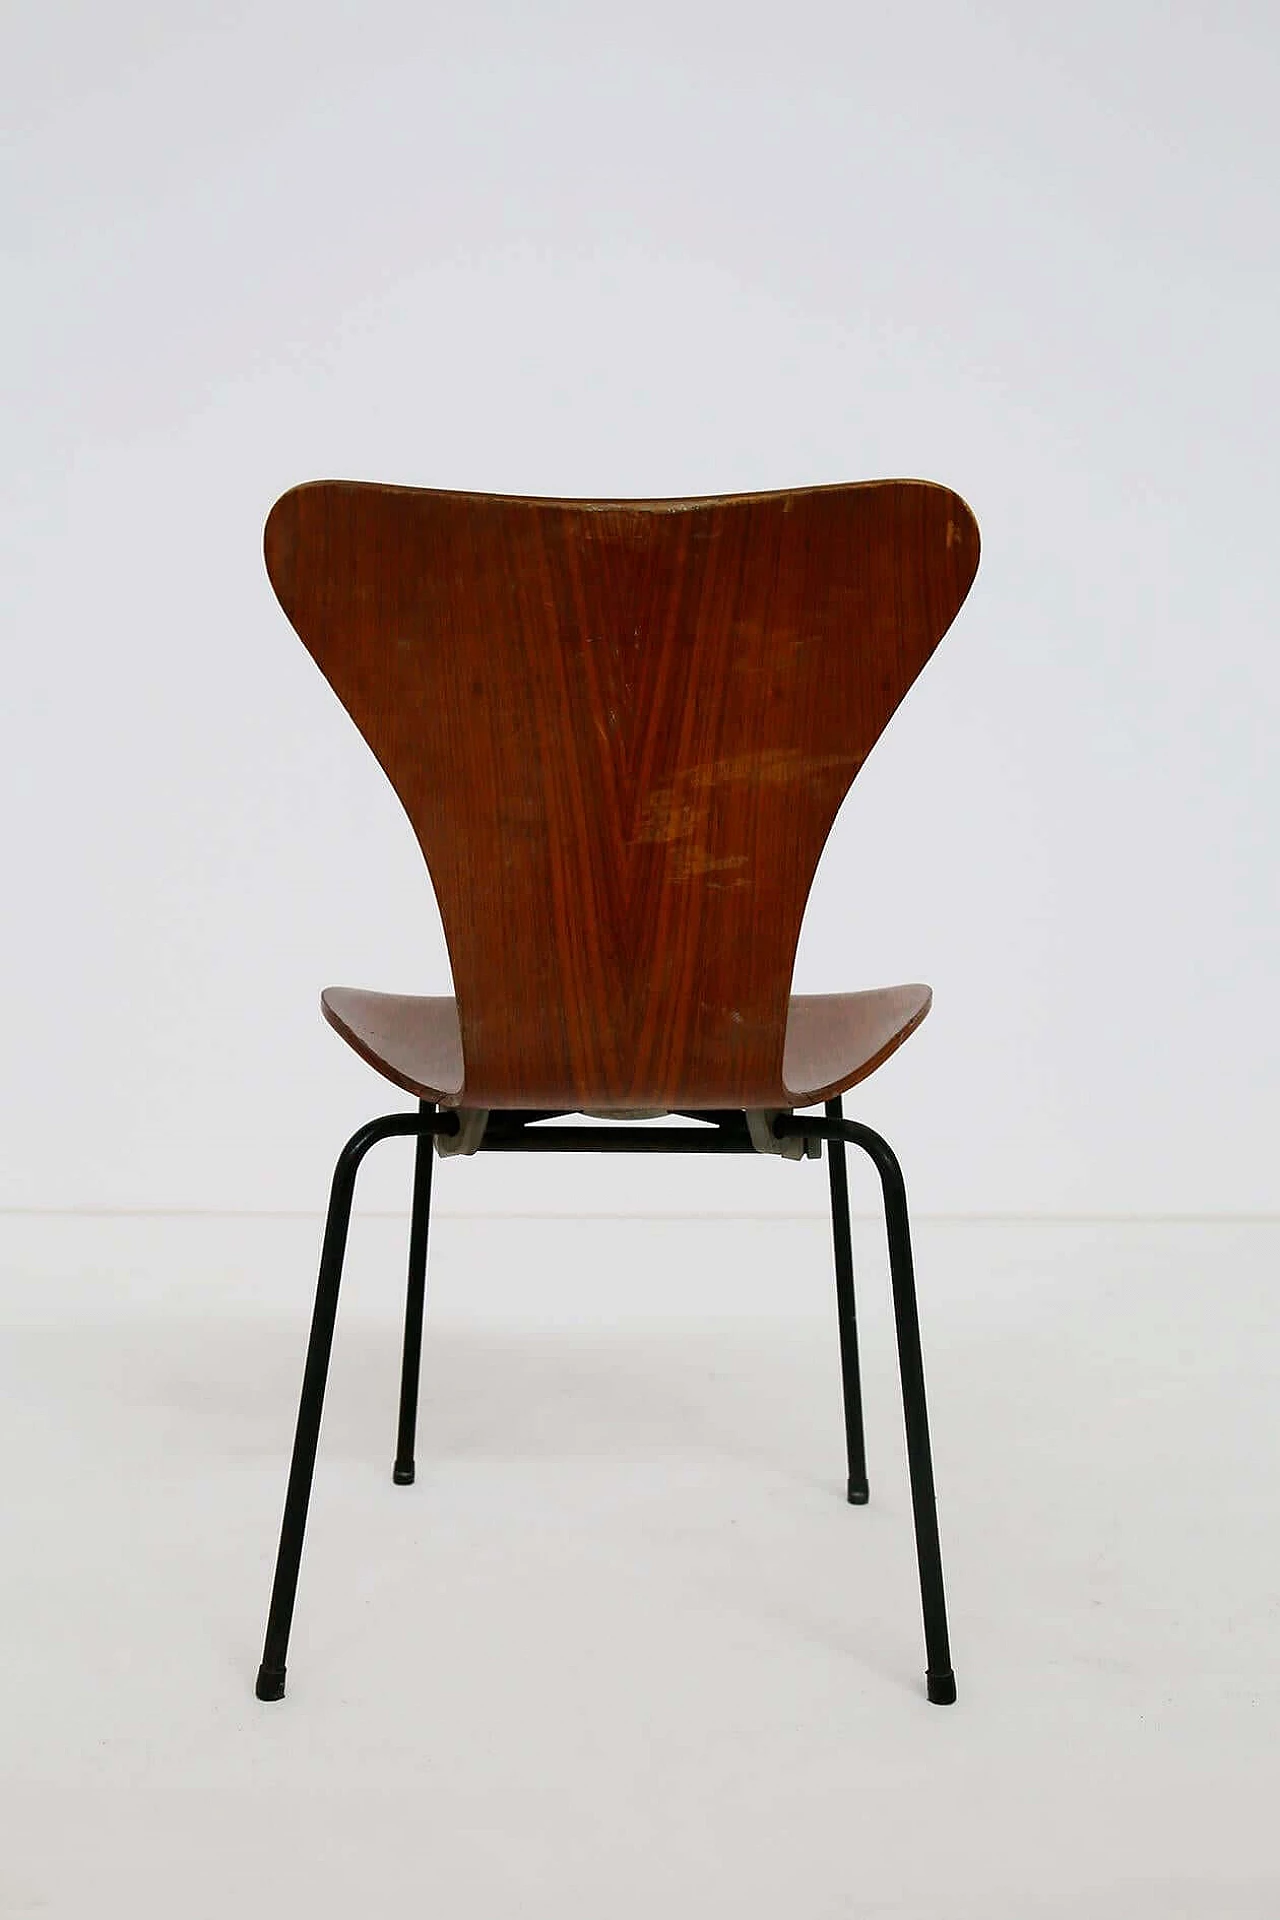 6 Chairs by Arne Jacobsen model Butterfly for the Brazilian airline Varig, 1950s 1387801